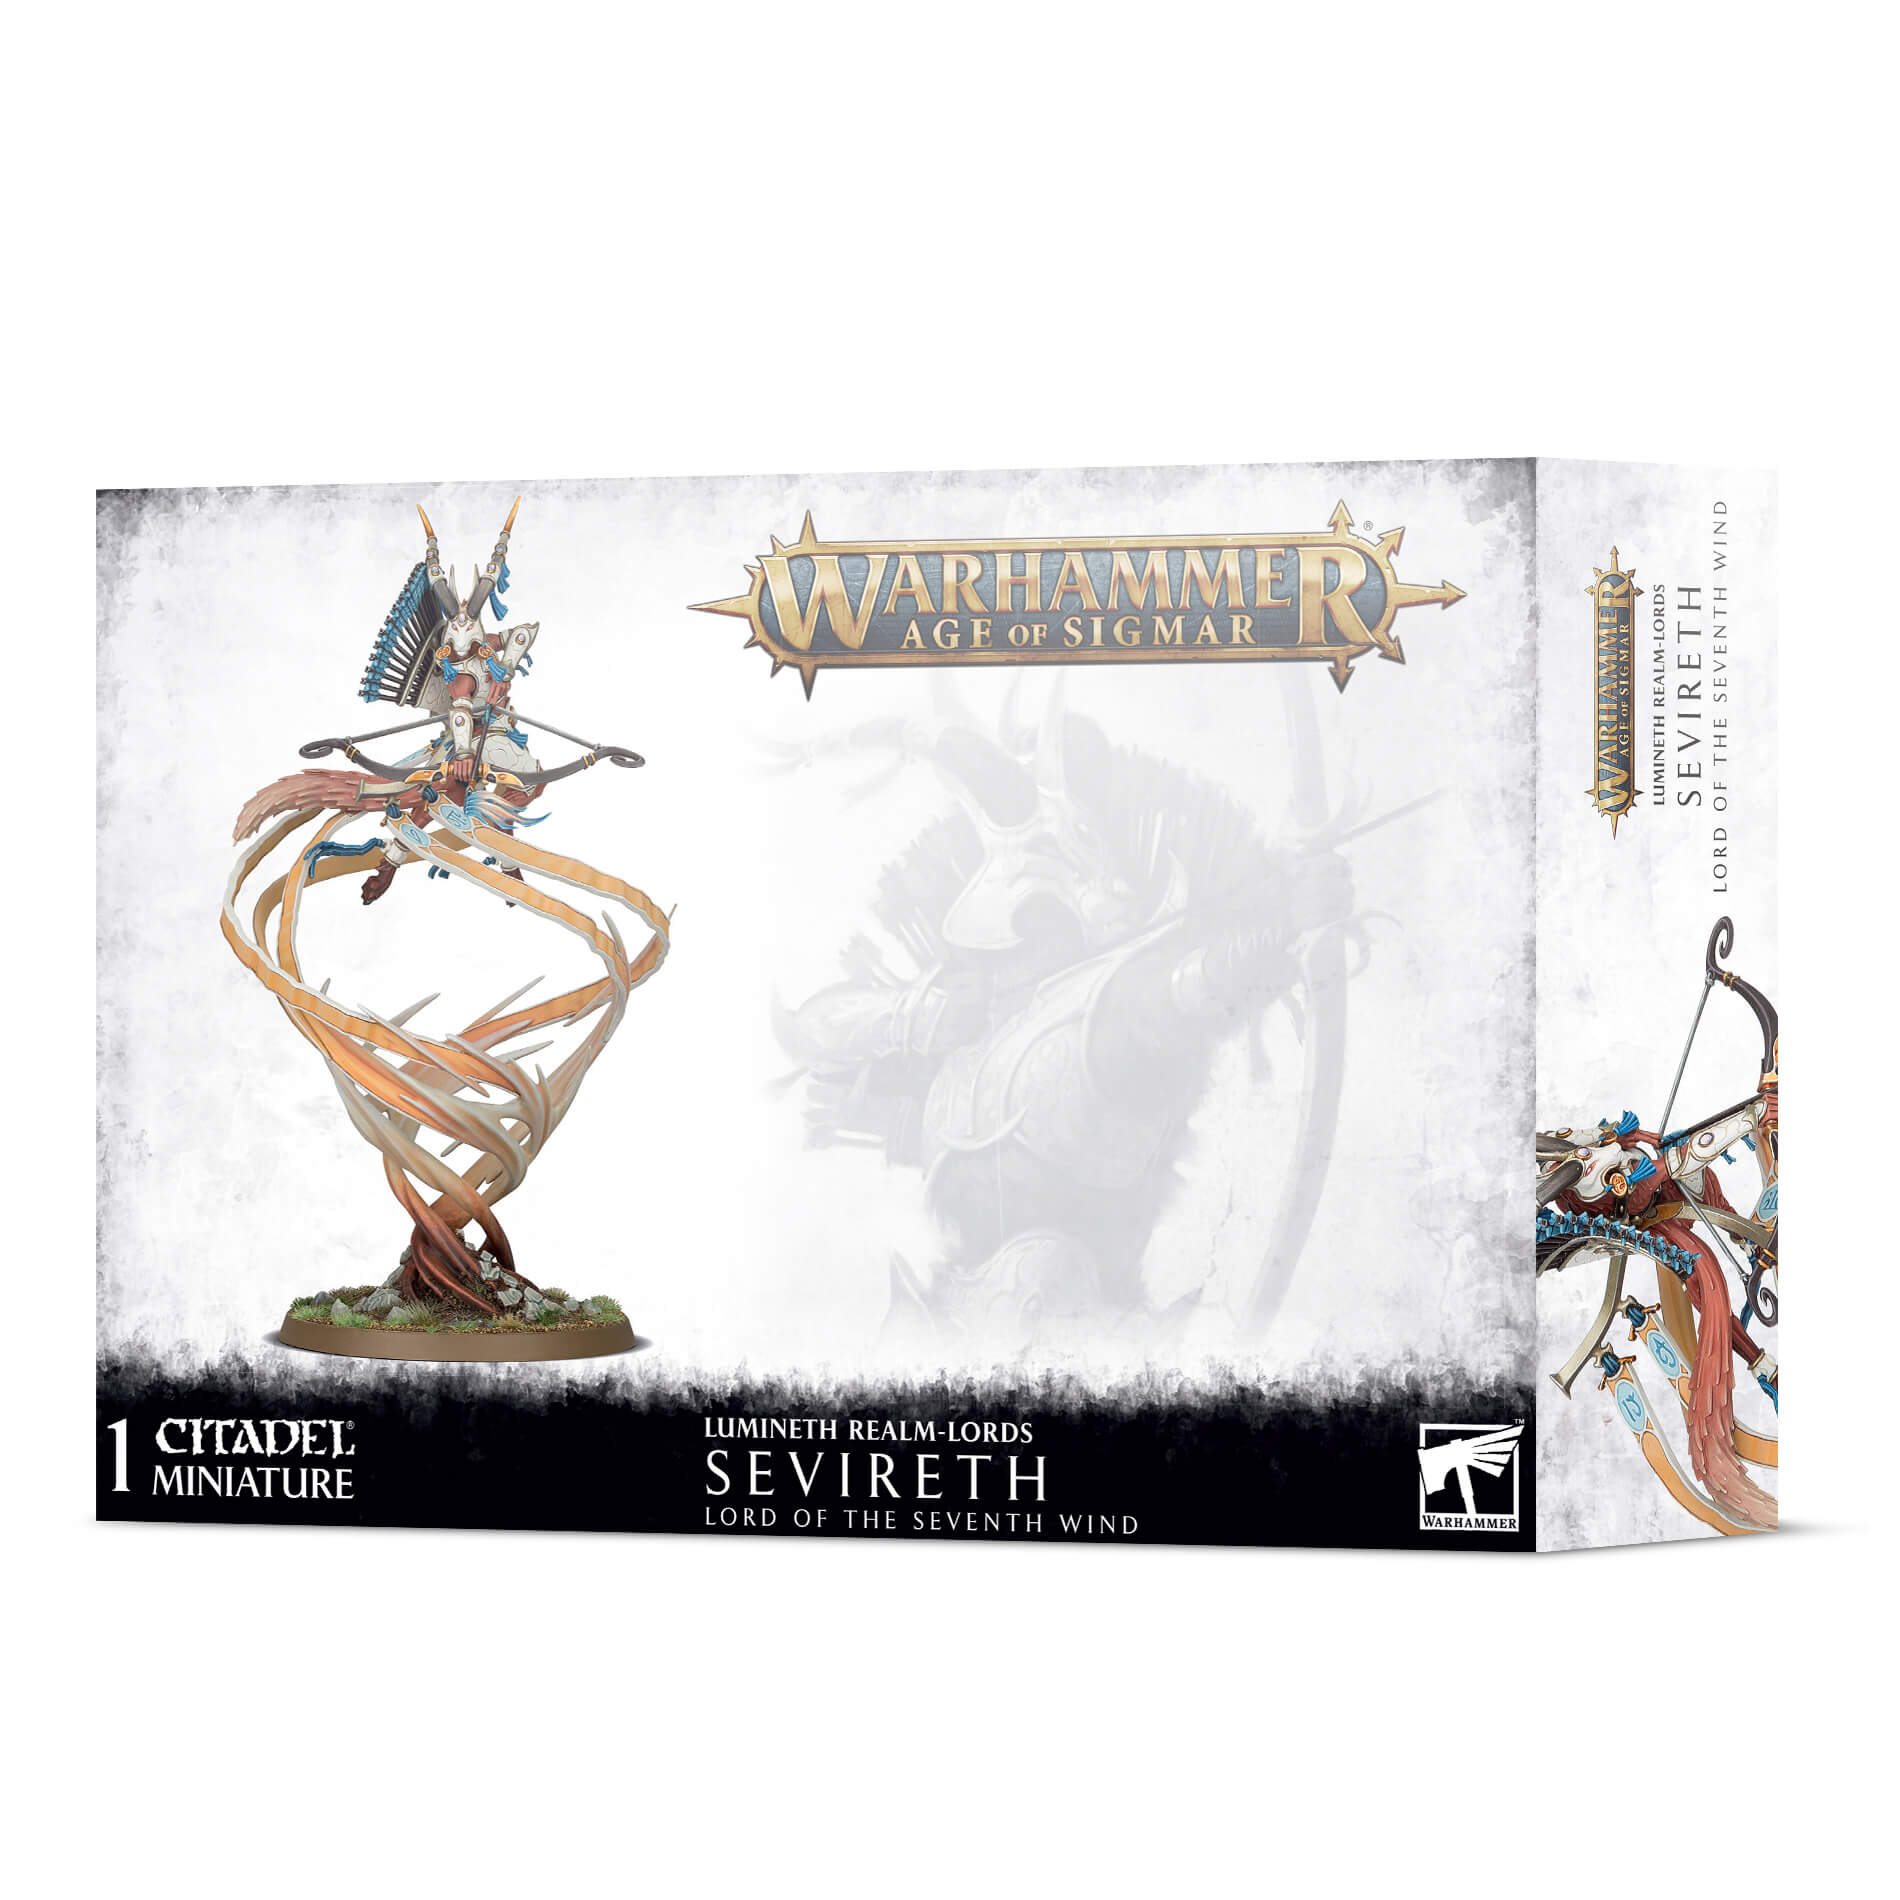 Warhammer Age of Sigmar Lumineth Realm-Lords Sevireth Lord of the Seventh Wind Miniature